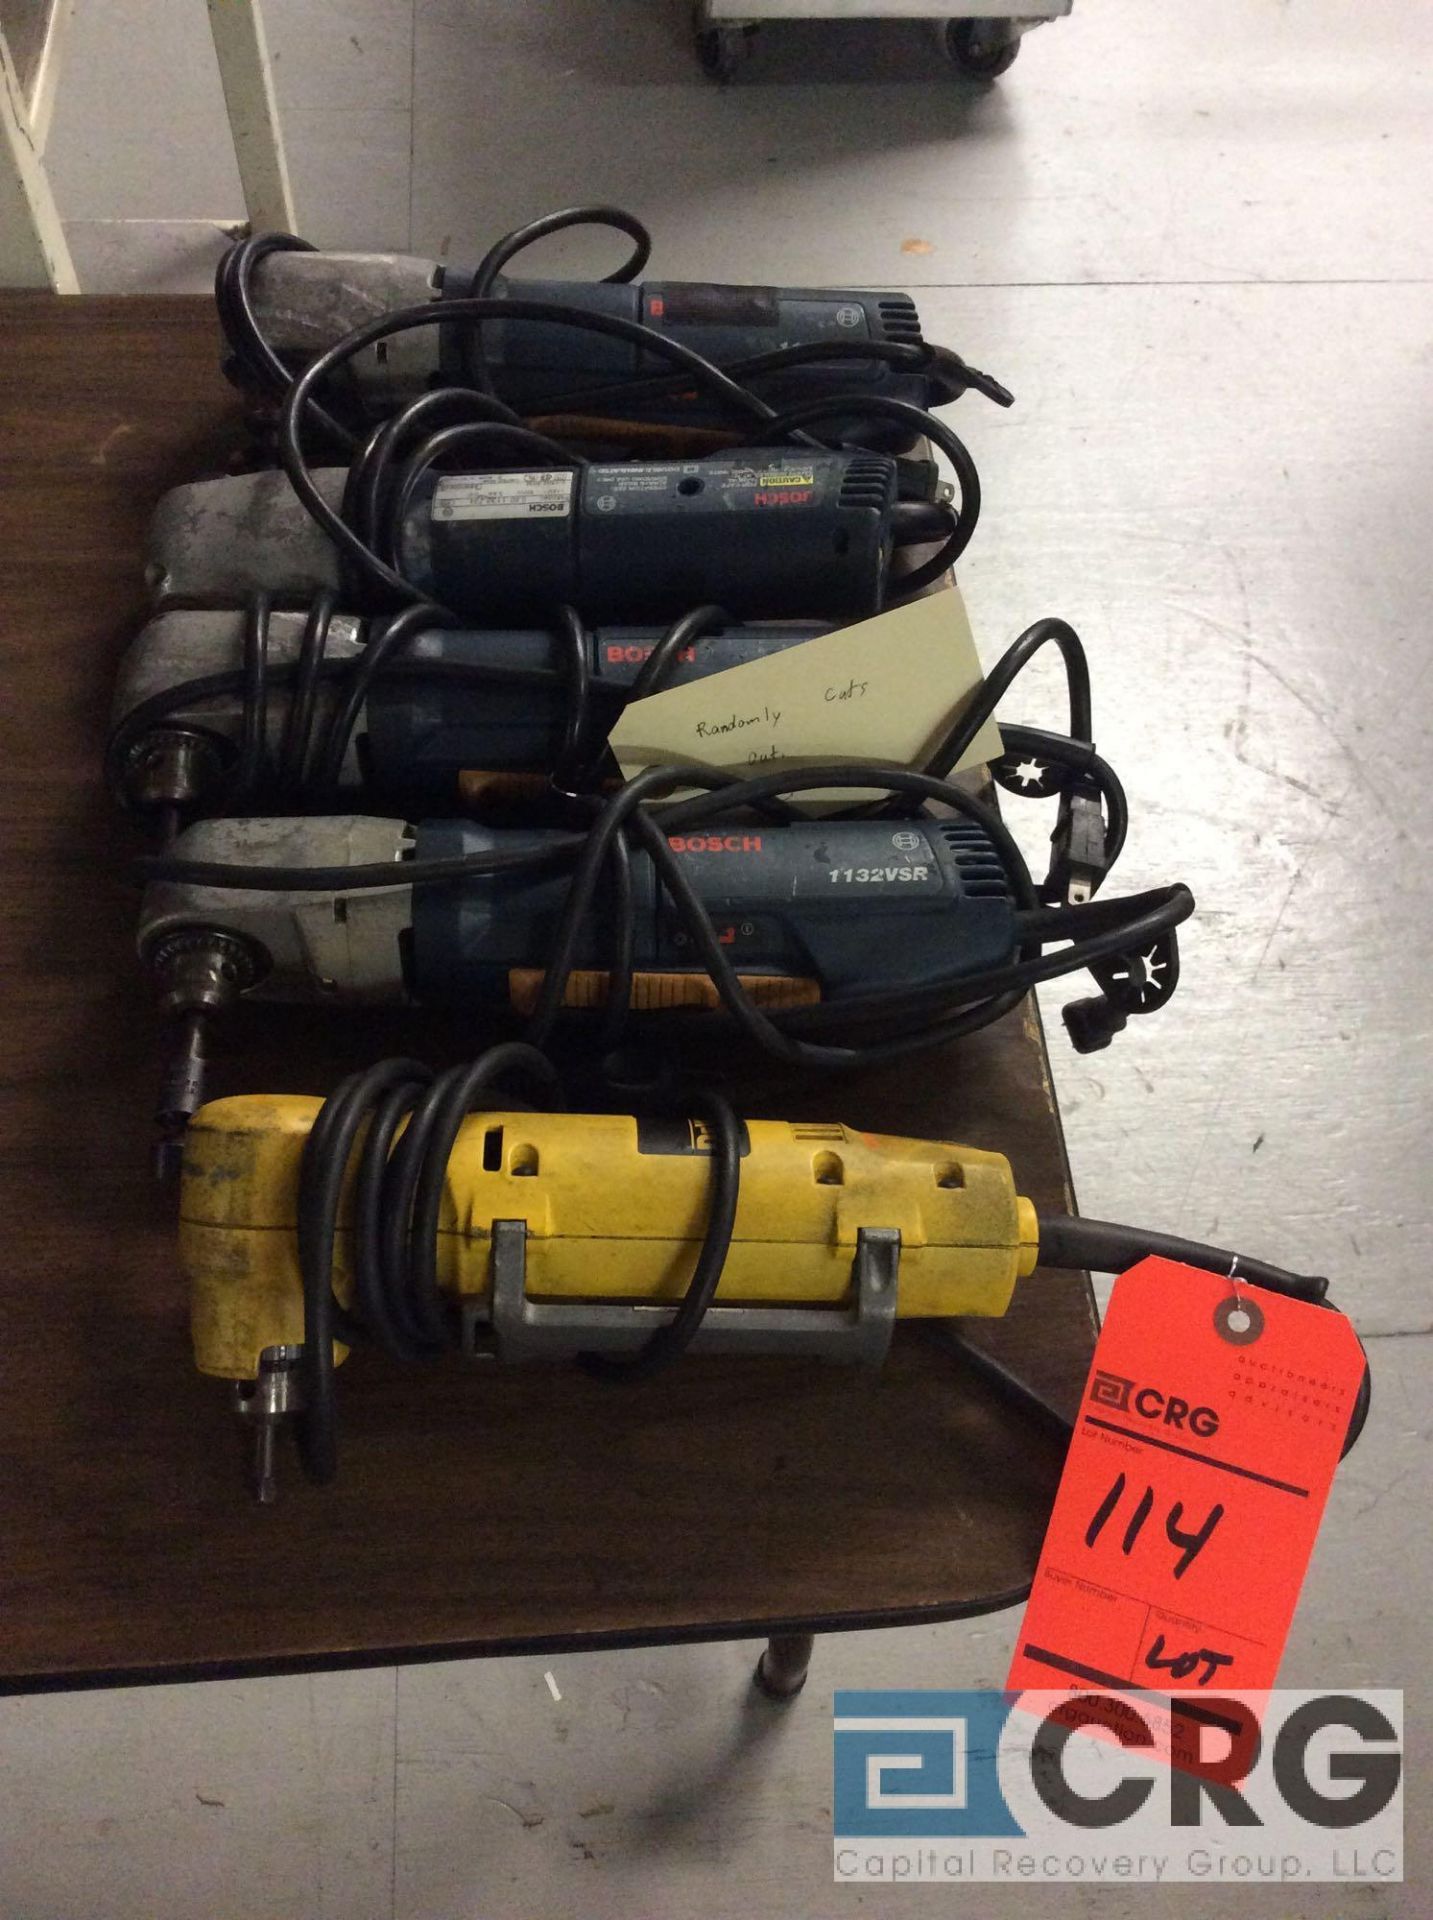 Lot of asst timing lights and right angle drill/grinders - Image 2 of 3